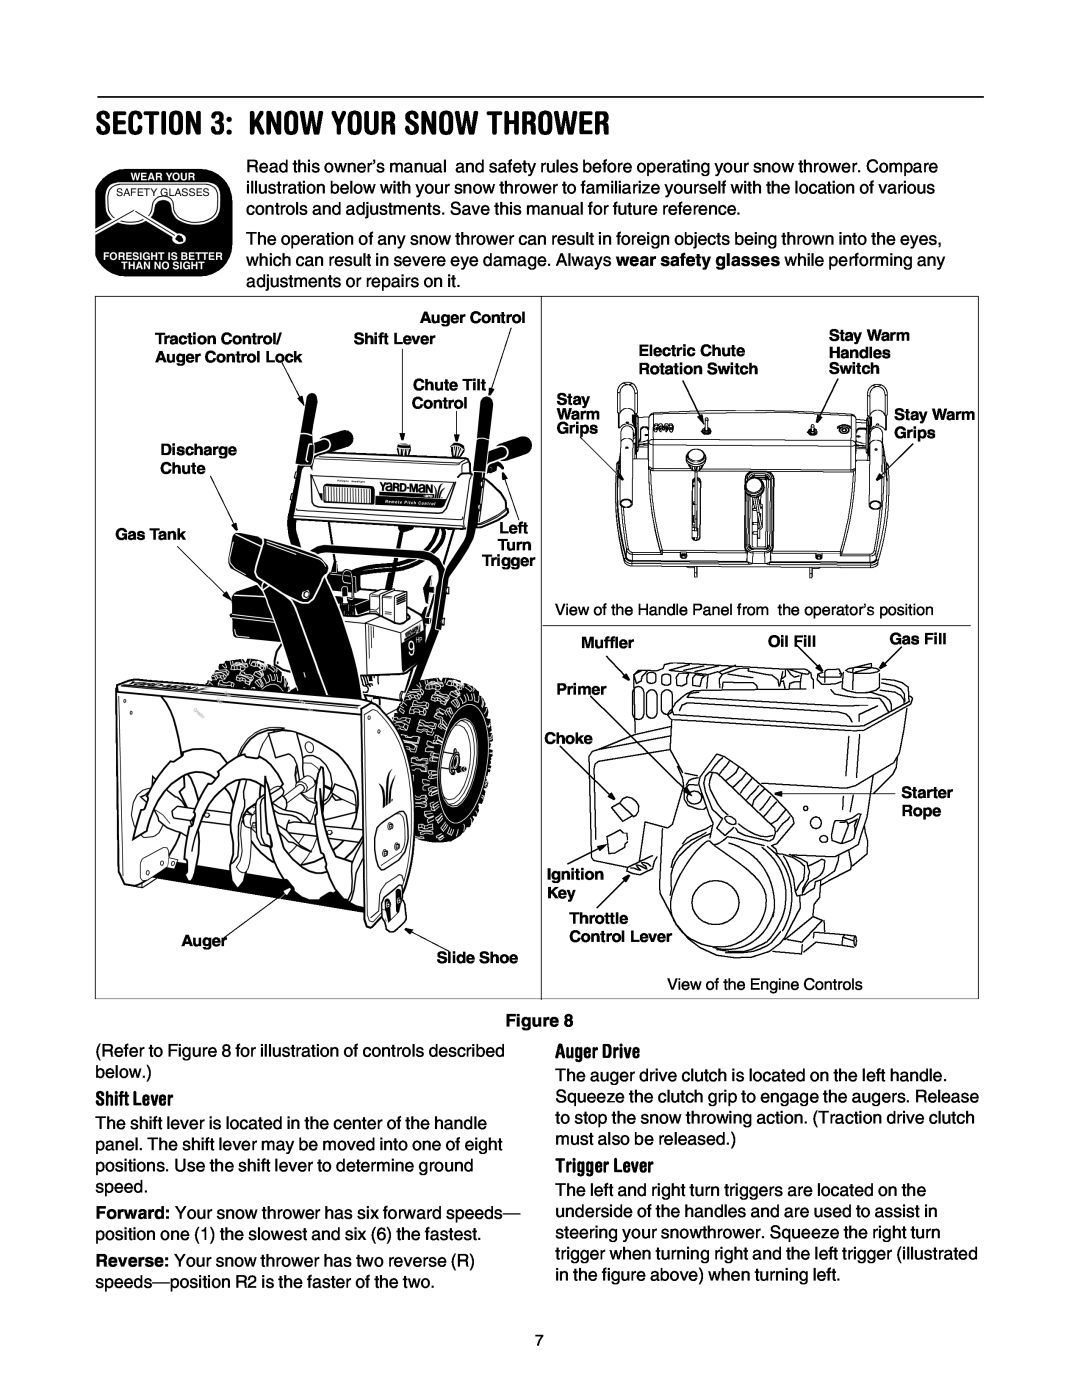 MTD 31AH553G401 manual Know Your Snow Thrower, Shift Lever, Auger Drive, Trigger Lever 